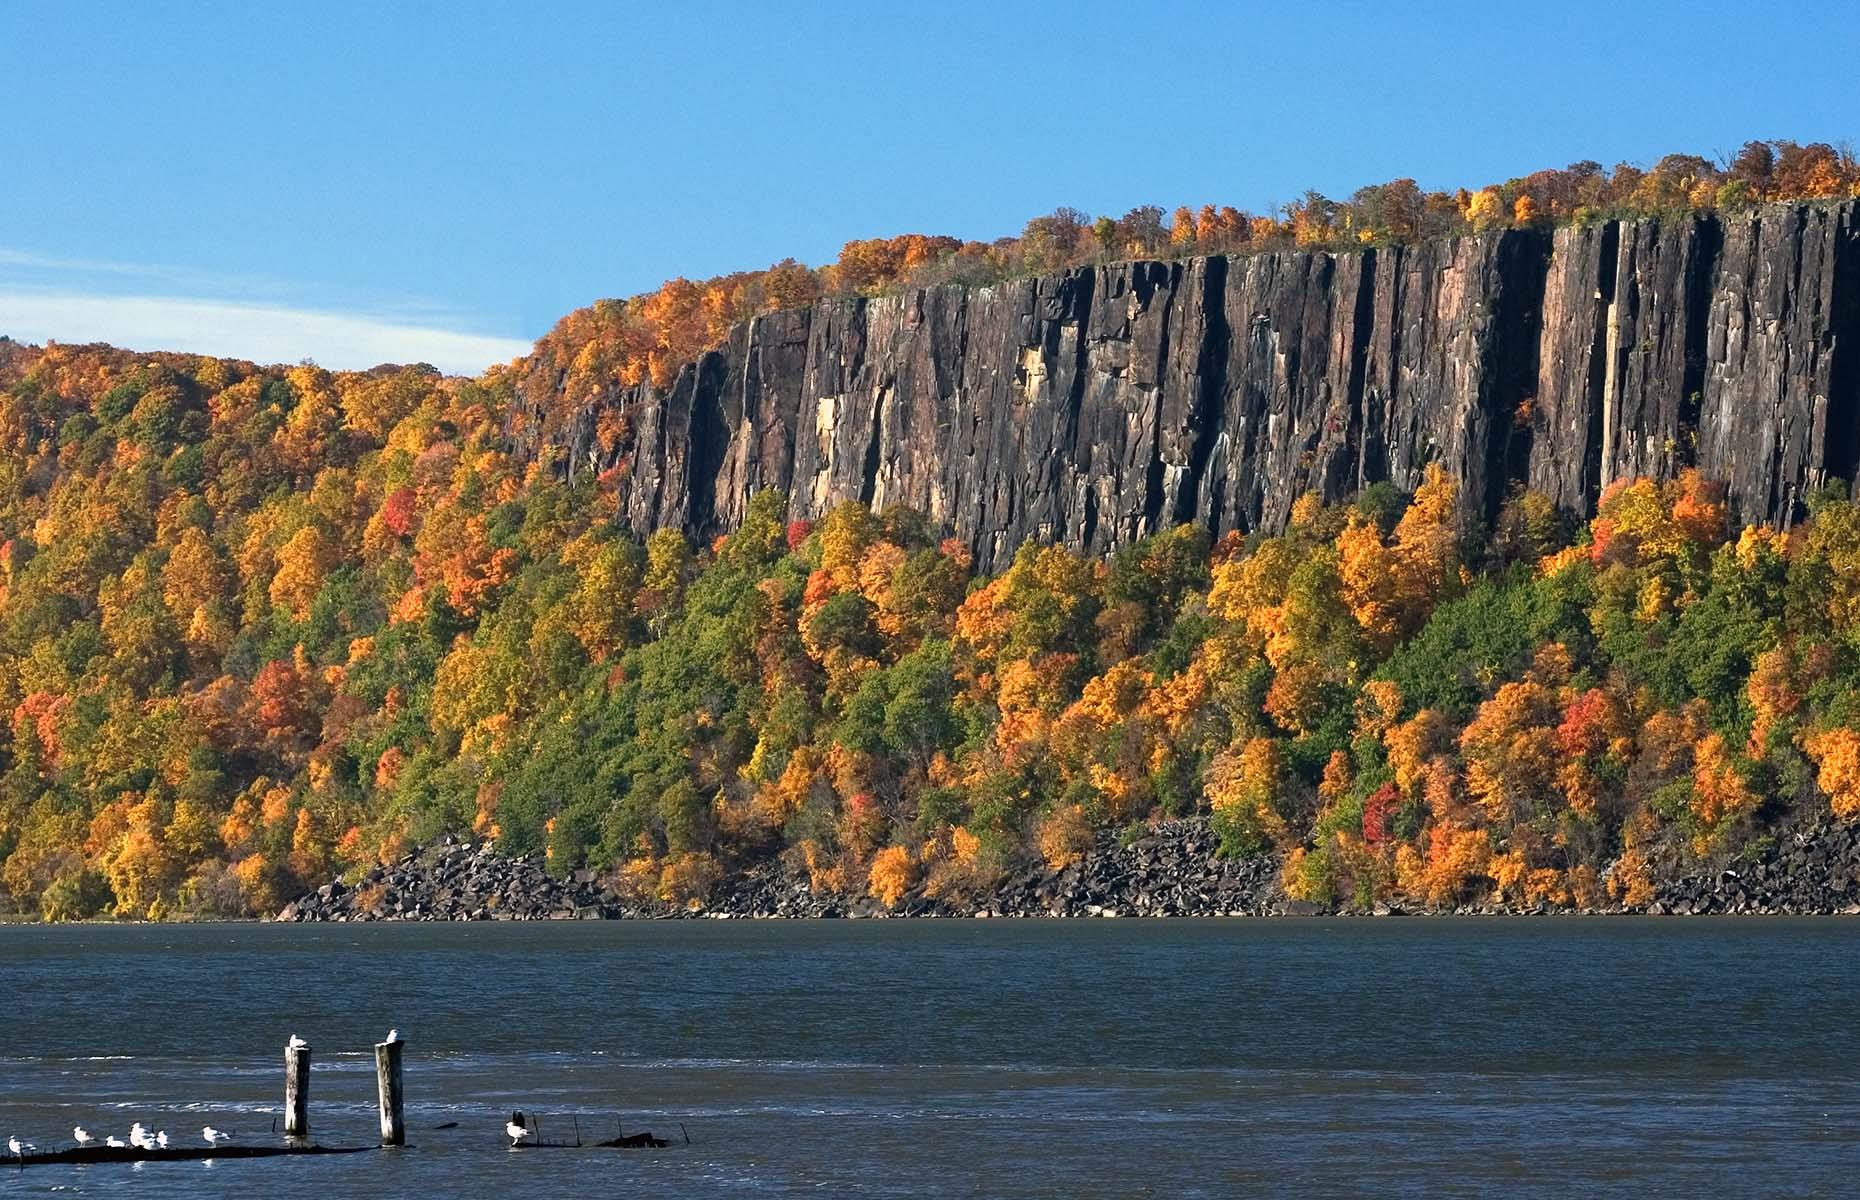 <p>Covering 19 stunning miles (30.5km), the <a href="http://njscenicbyways.com/byways/palisades">Palisades Scenic Byway</a> connects the George Washington Bridge at Fort Lee in New Jersey with acres of parkland across the state border in New York. The byway makes the most of the 500-foot-tall (152m) Palisades Cliffs (pictured), offering countless scenic viewpoints and picnic spots along the way. Traveling north along the Hudson River, the byway is an excellent outdoor escape from the city and the surrounding urban areas.</p>  <p><a href="https://www.loveexploring.com/galleries/93434/vintage-images-of-americas-most-historic-attractions?page=1"><strong>Take a look at vintage images of America's most historic attractions</strong></a></p>